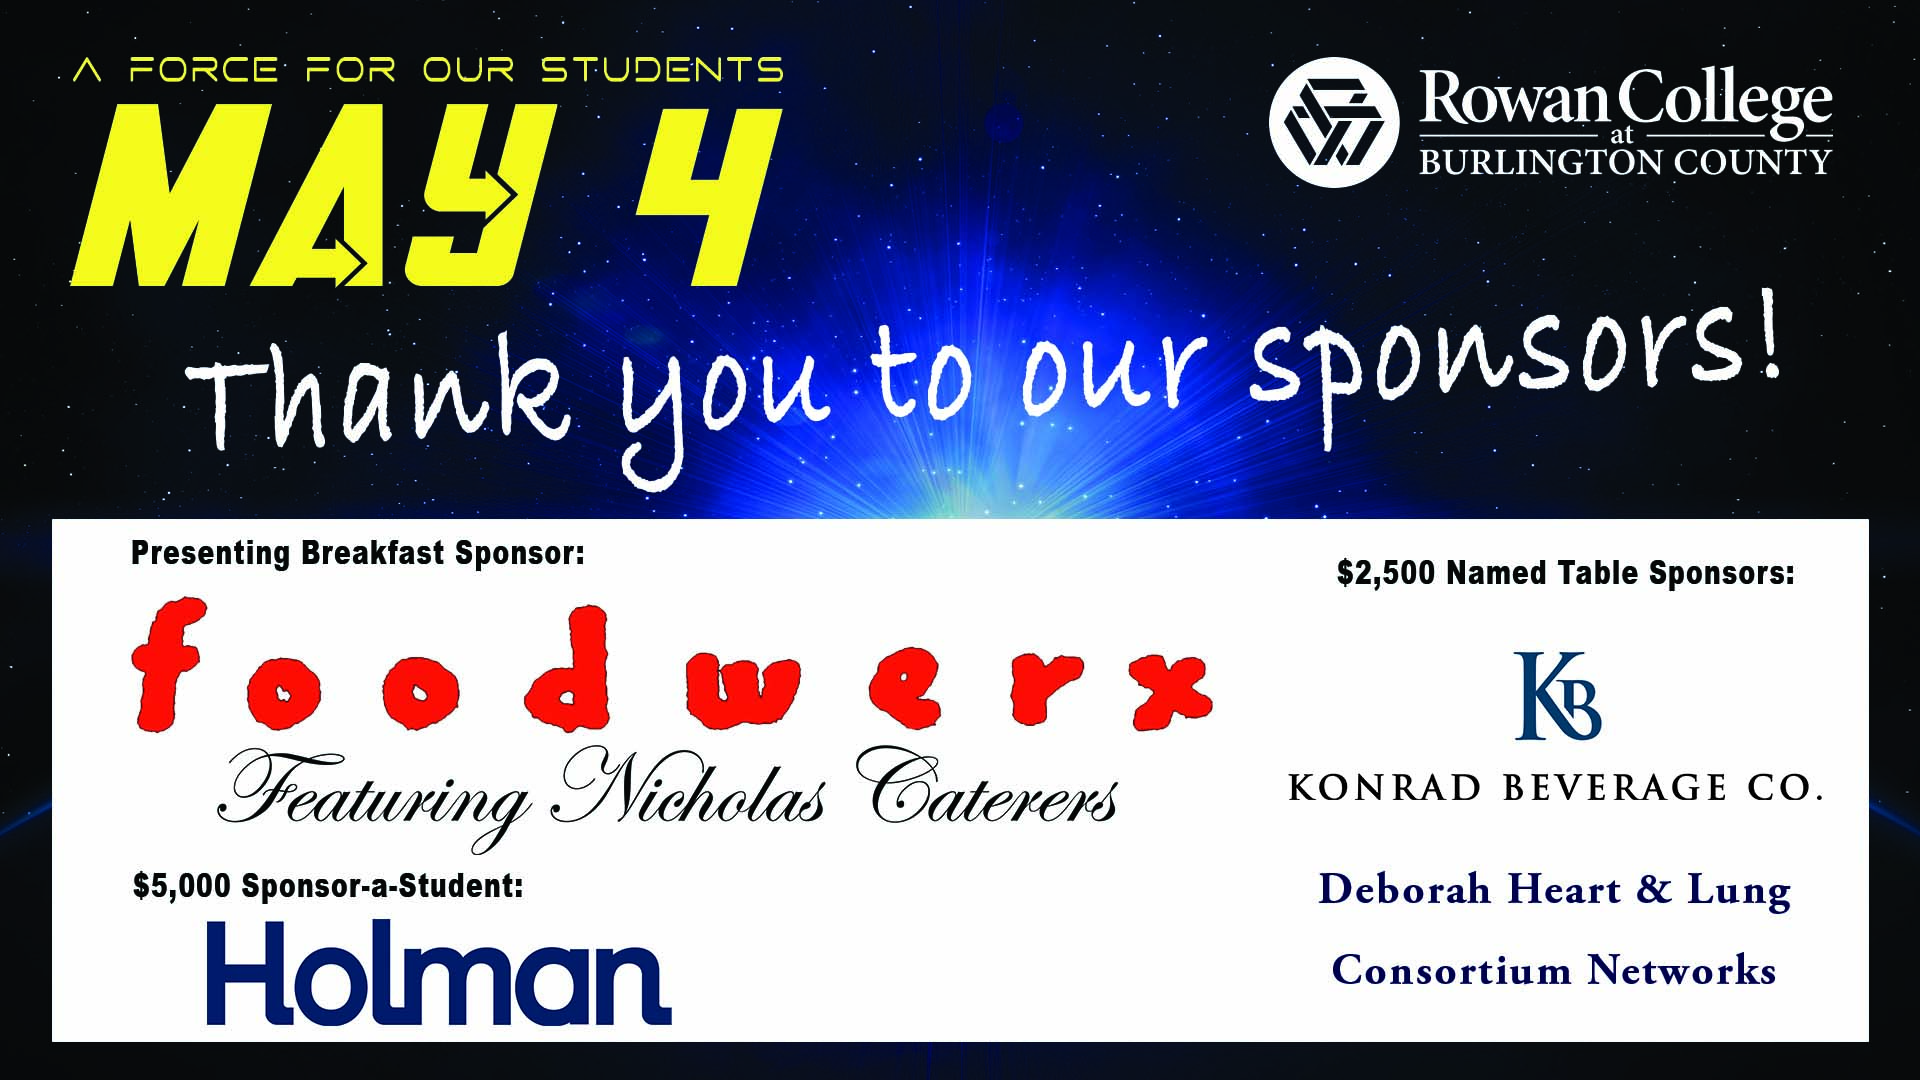 List of sponsors for RCBC foundation event